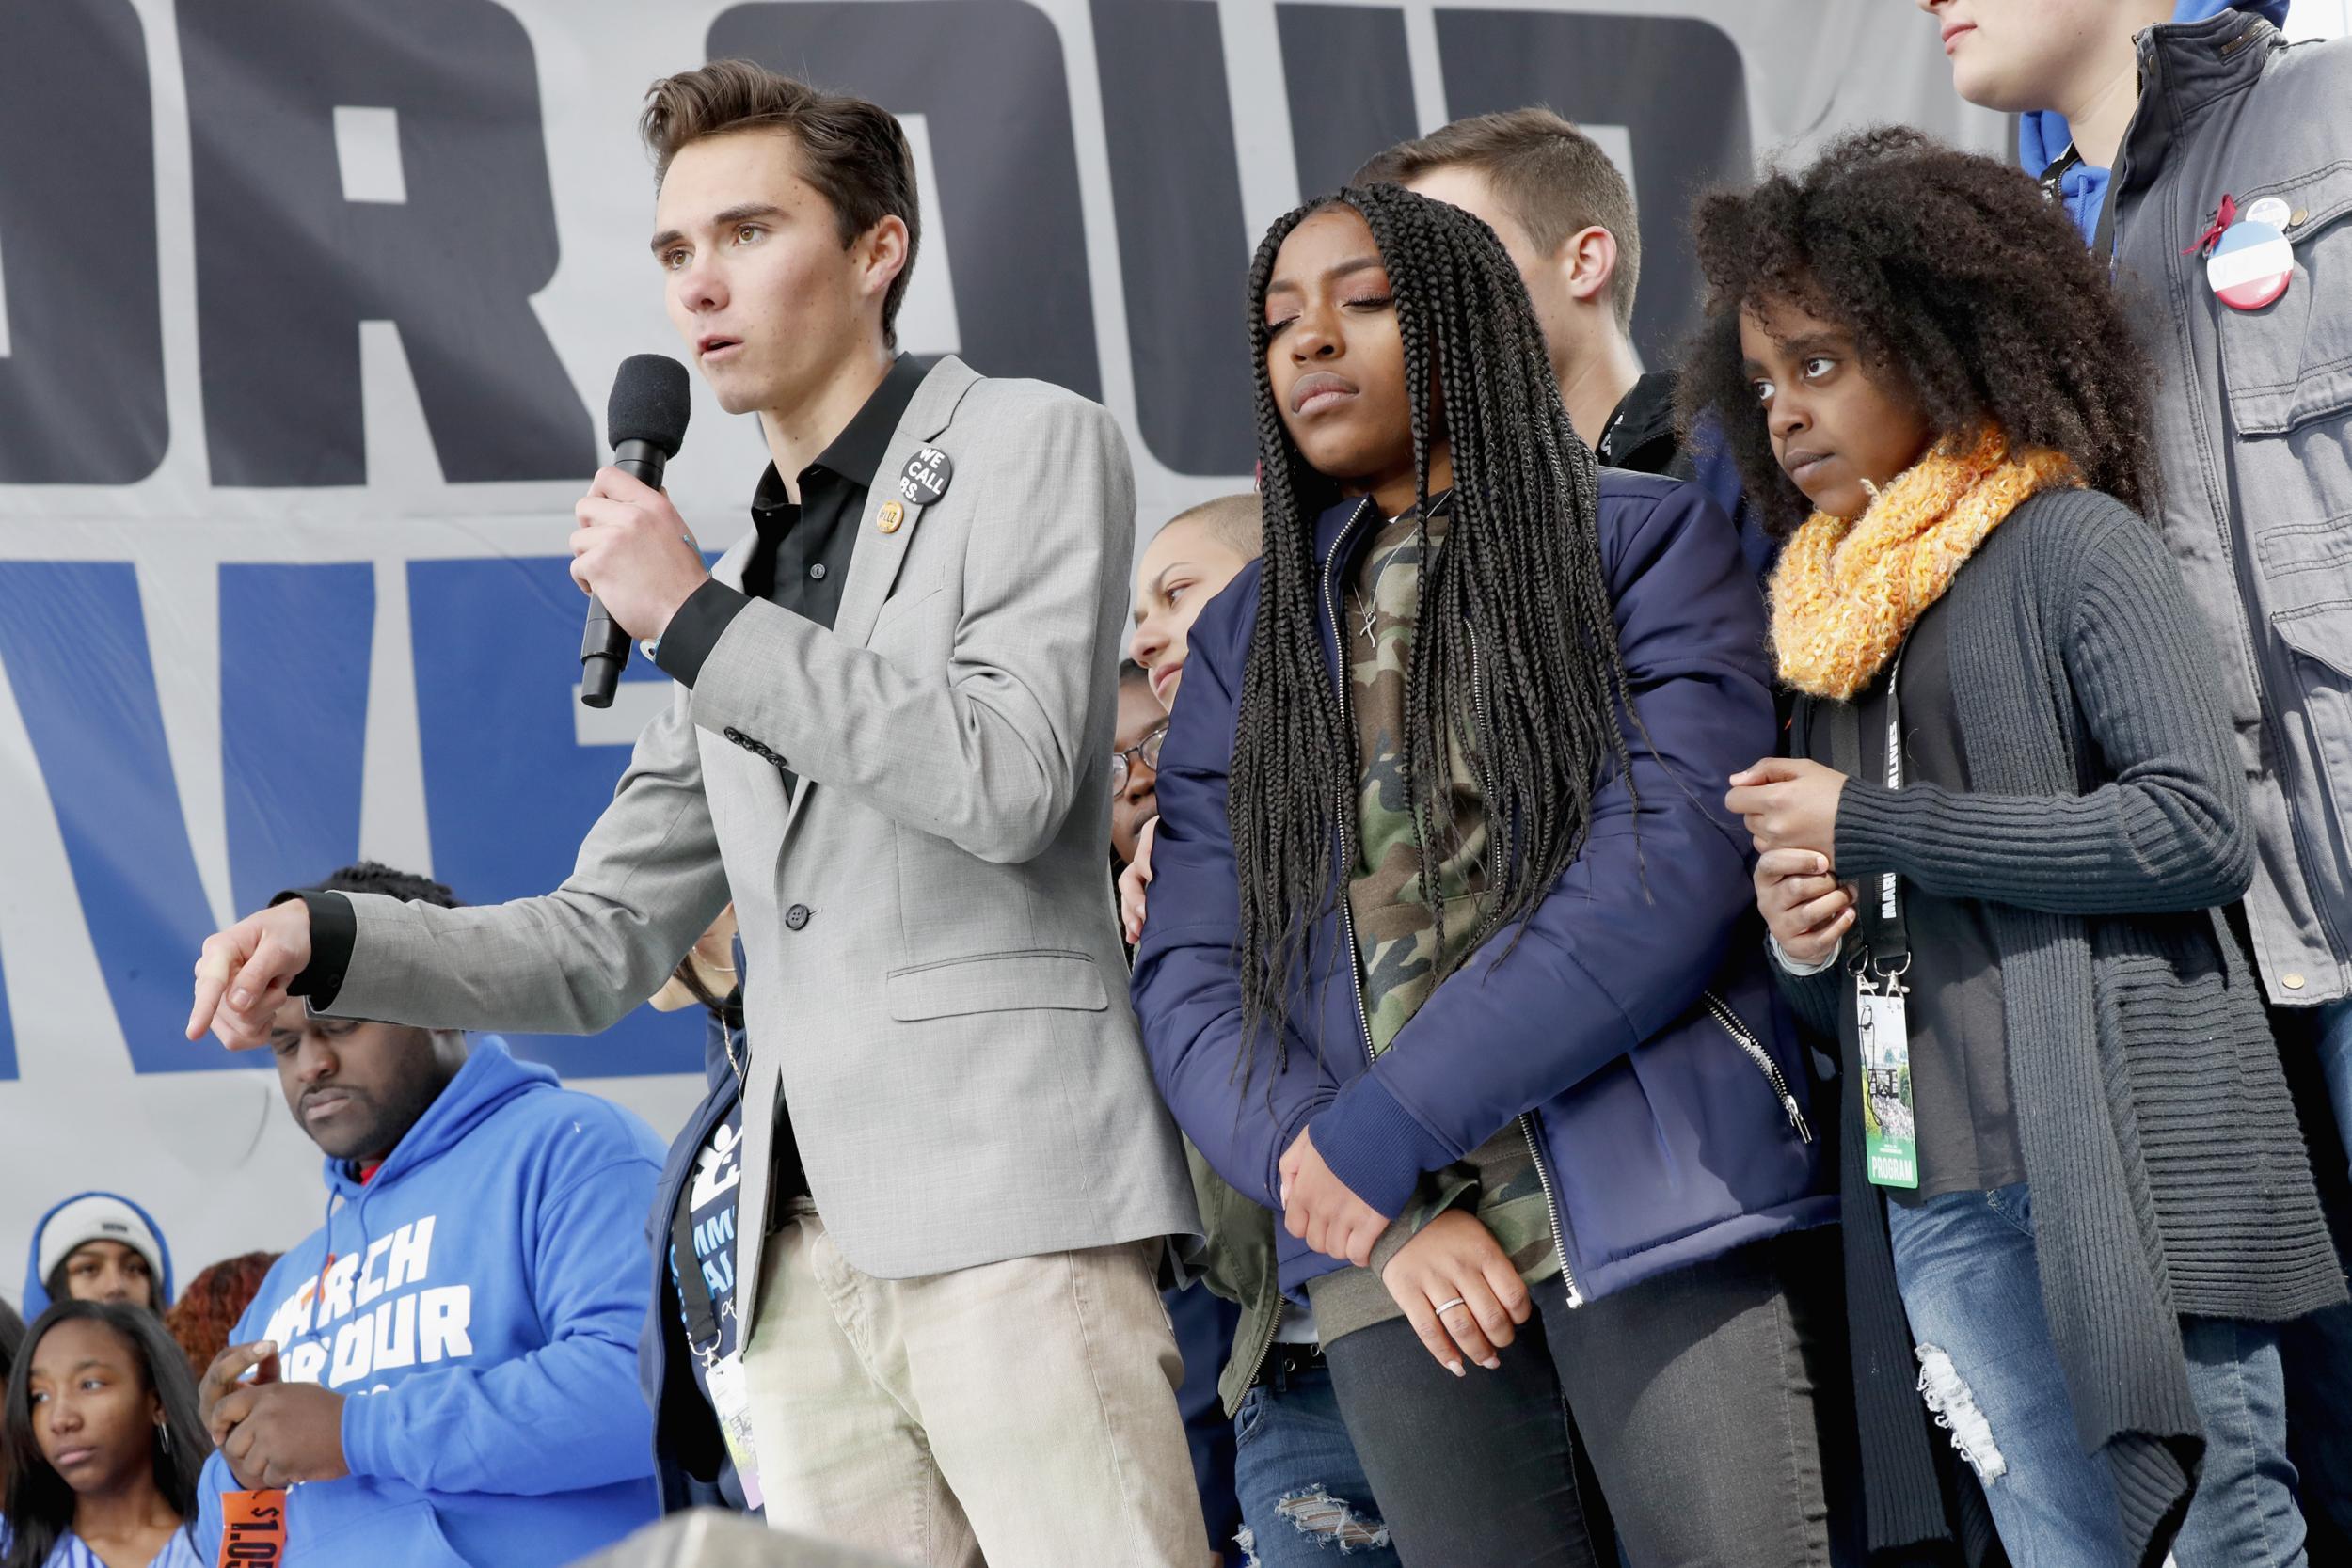 David Hogg, one of the survivors of the Parkland shooting, speaks at the March for Our Lives rally in Washington in March